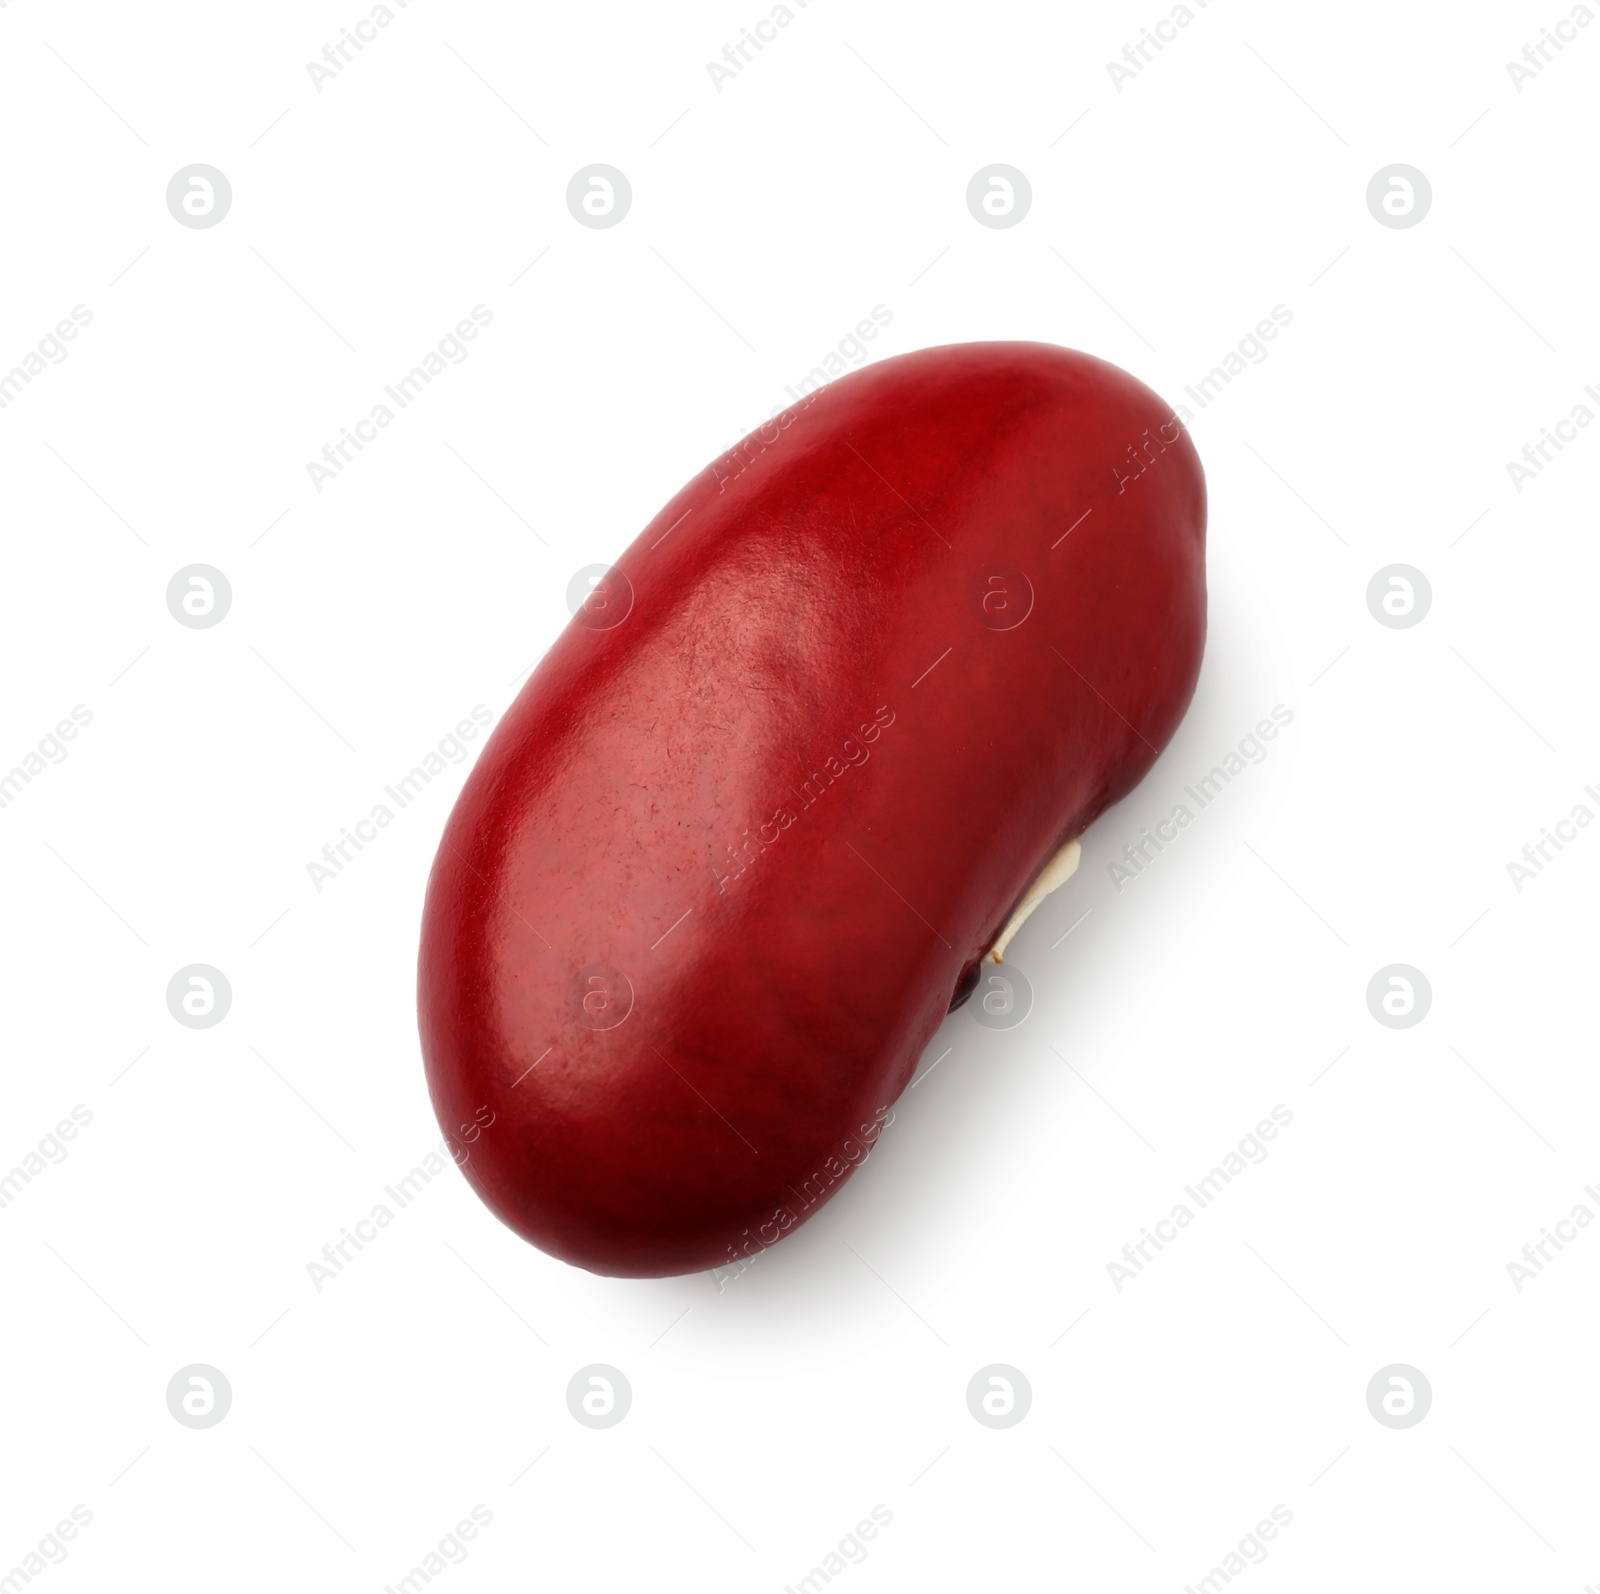 Photo of Raw red kidney bean isolated on white